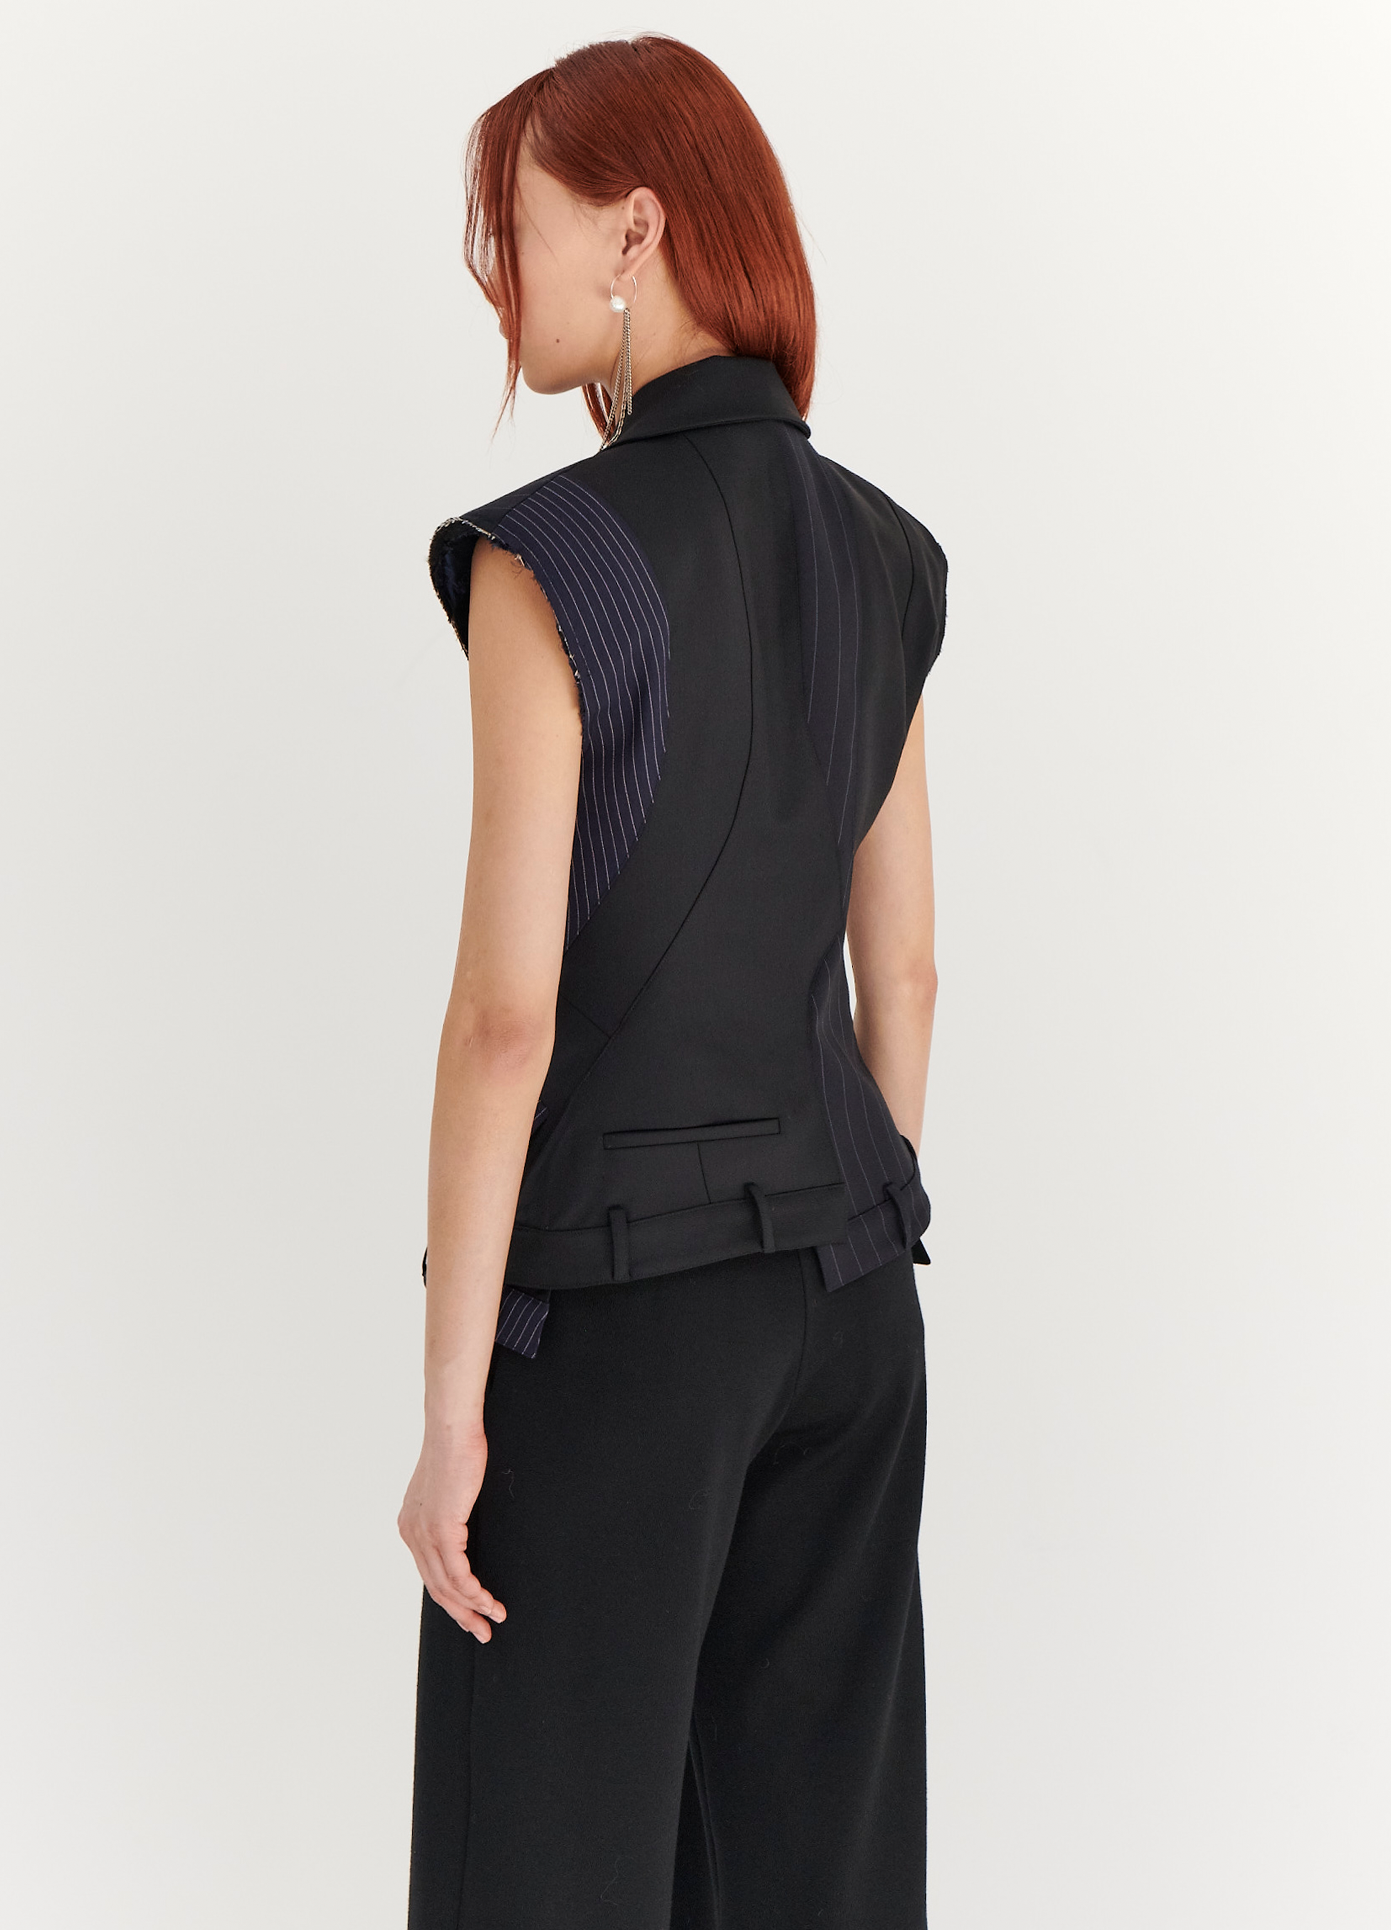 MONSE Deconstructed Sleeveless Jacket in Midnight on model back view